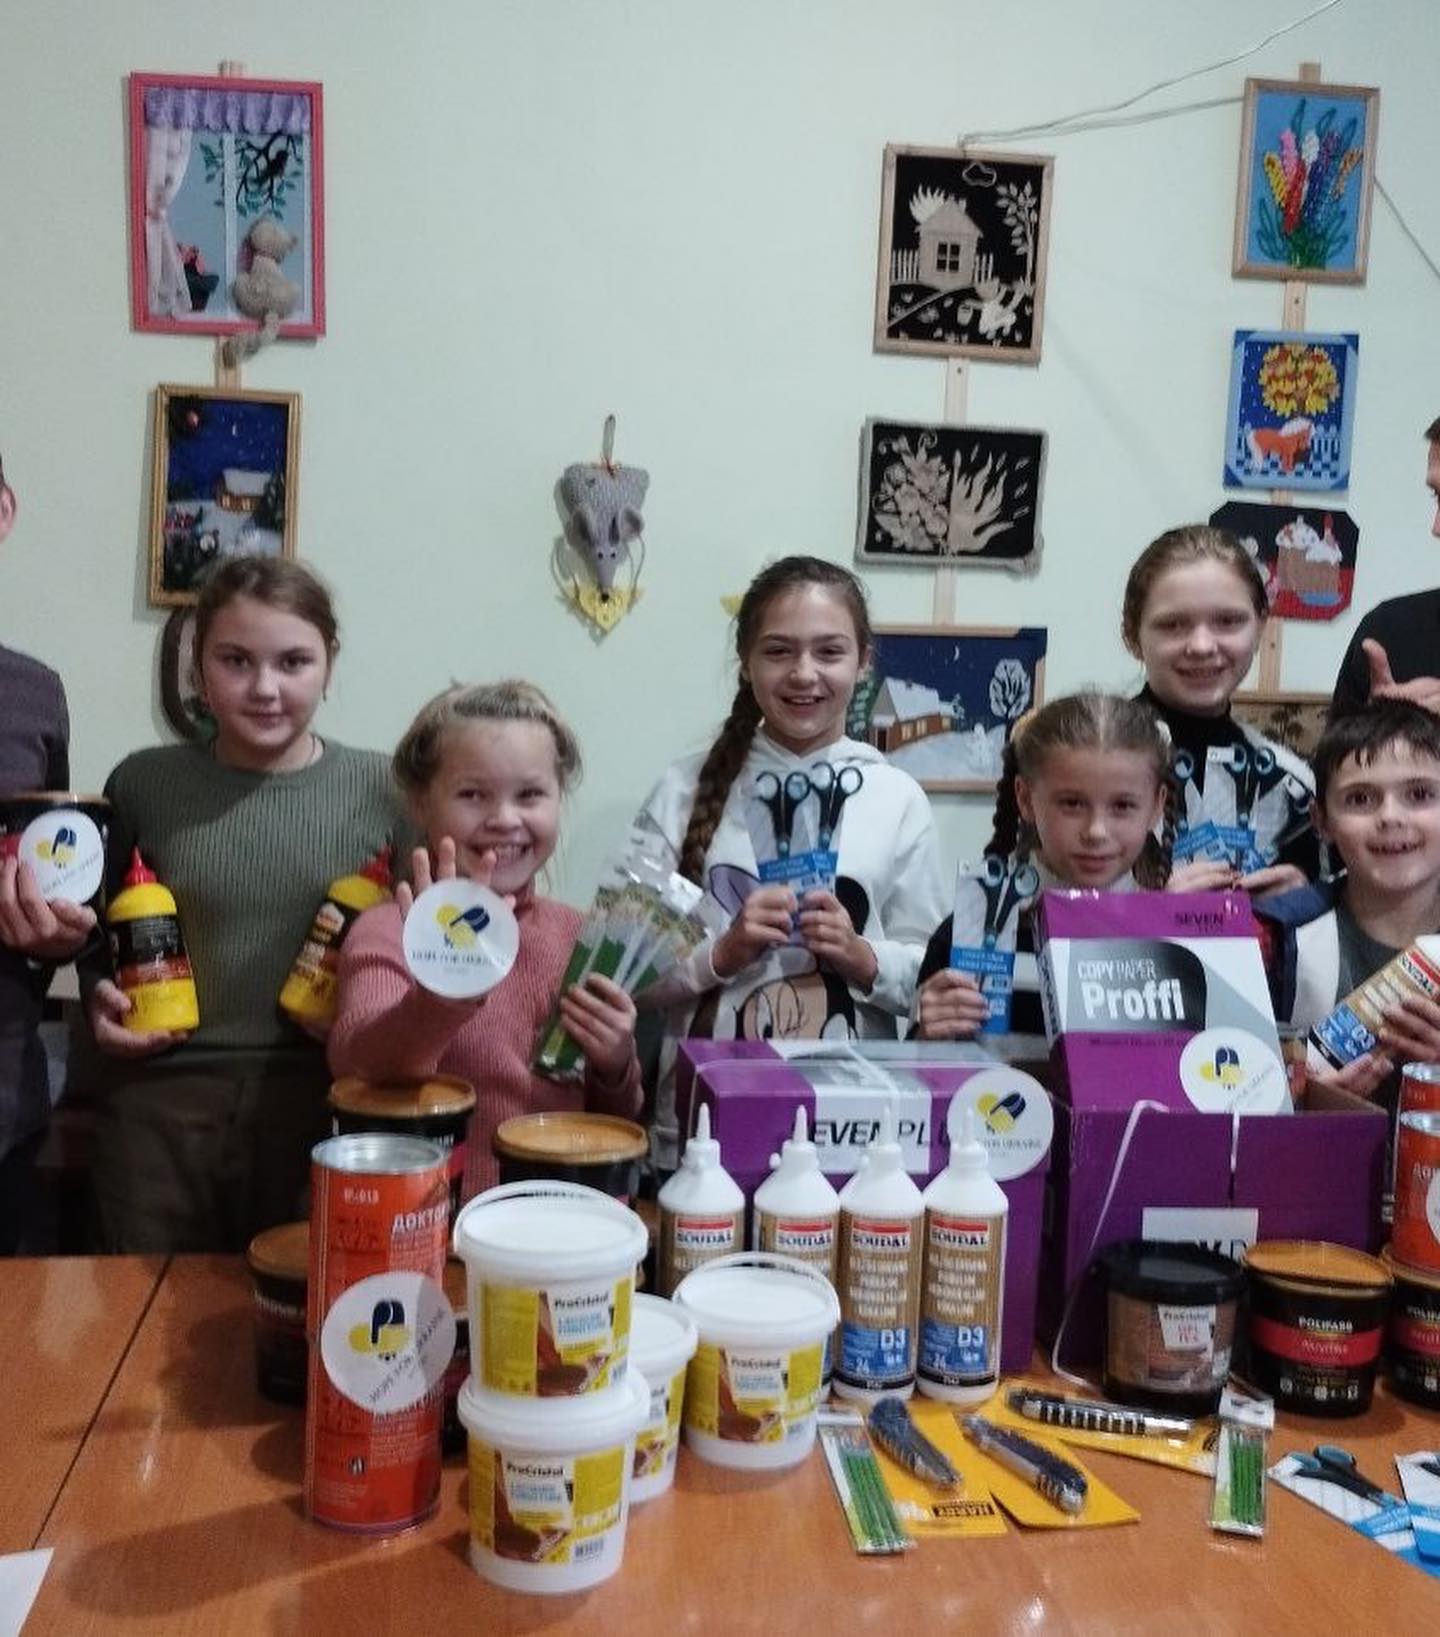 A group of children posing in front of a table full of products.